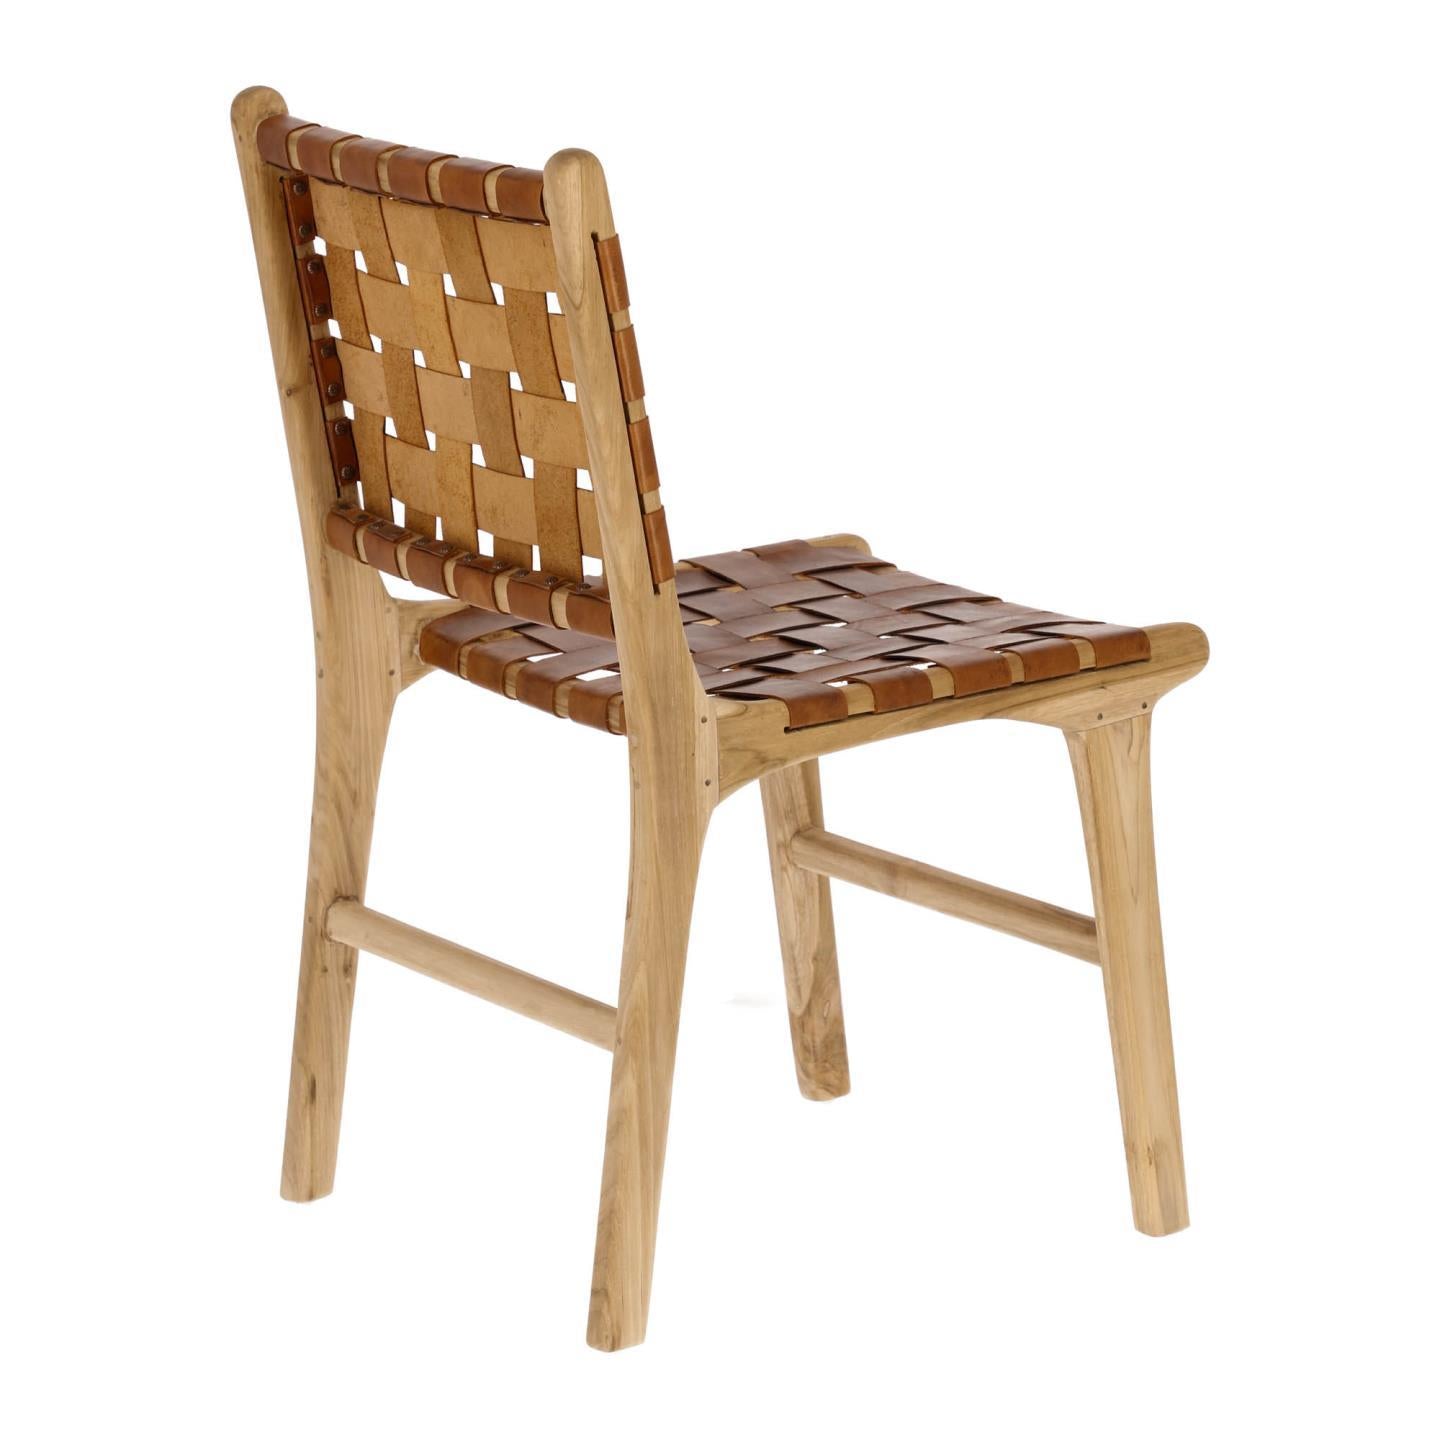 Calixta chair in leather and solid teak